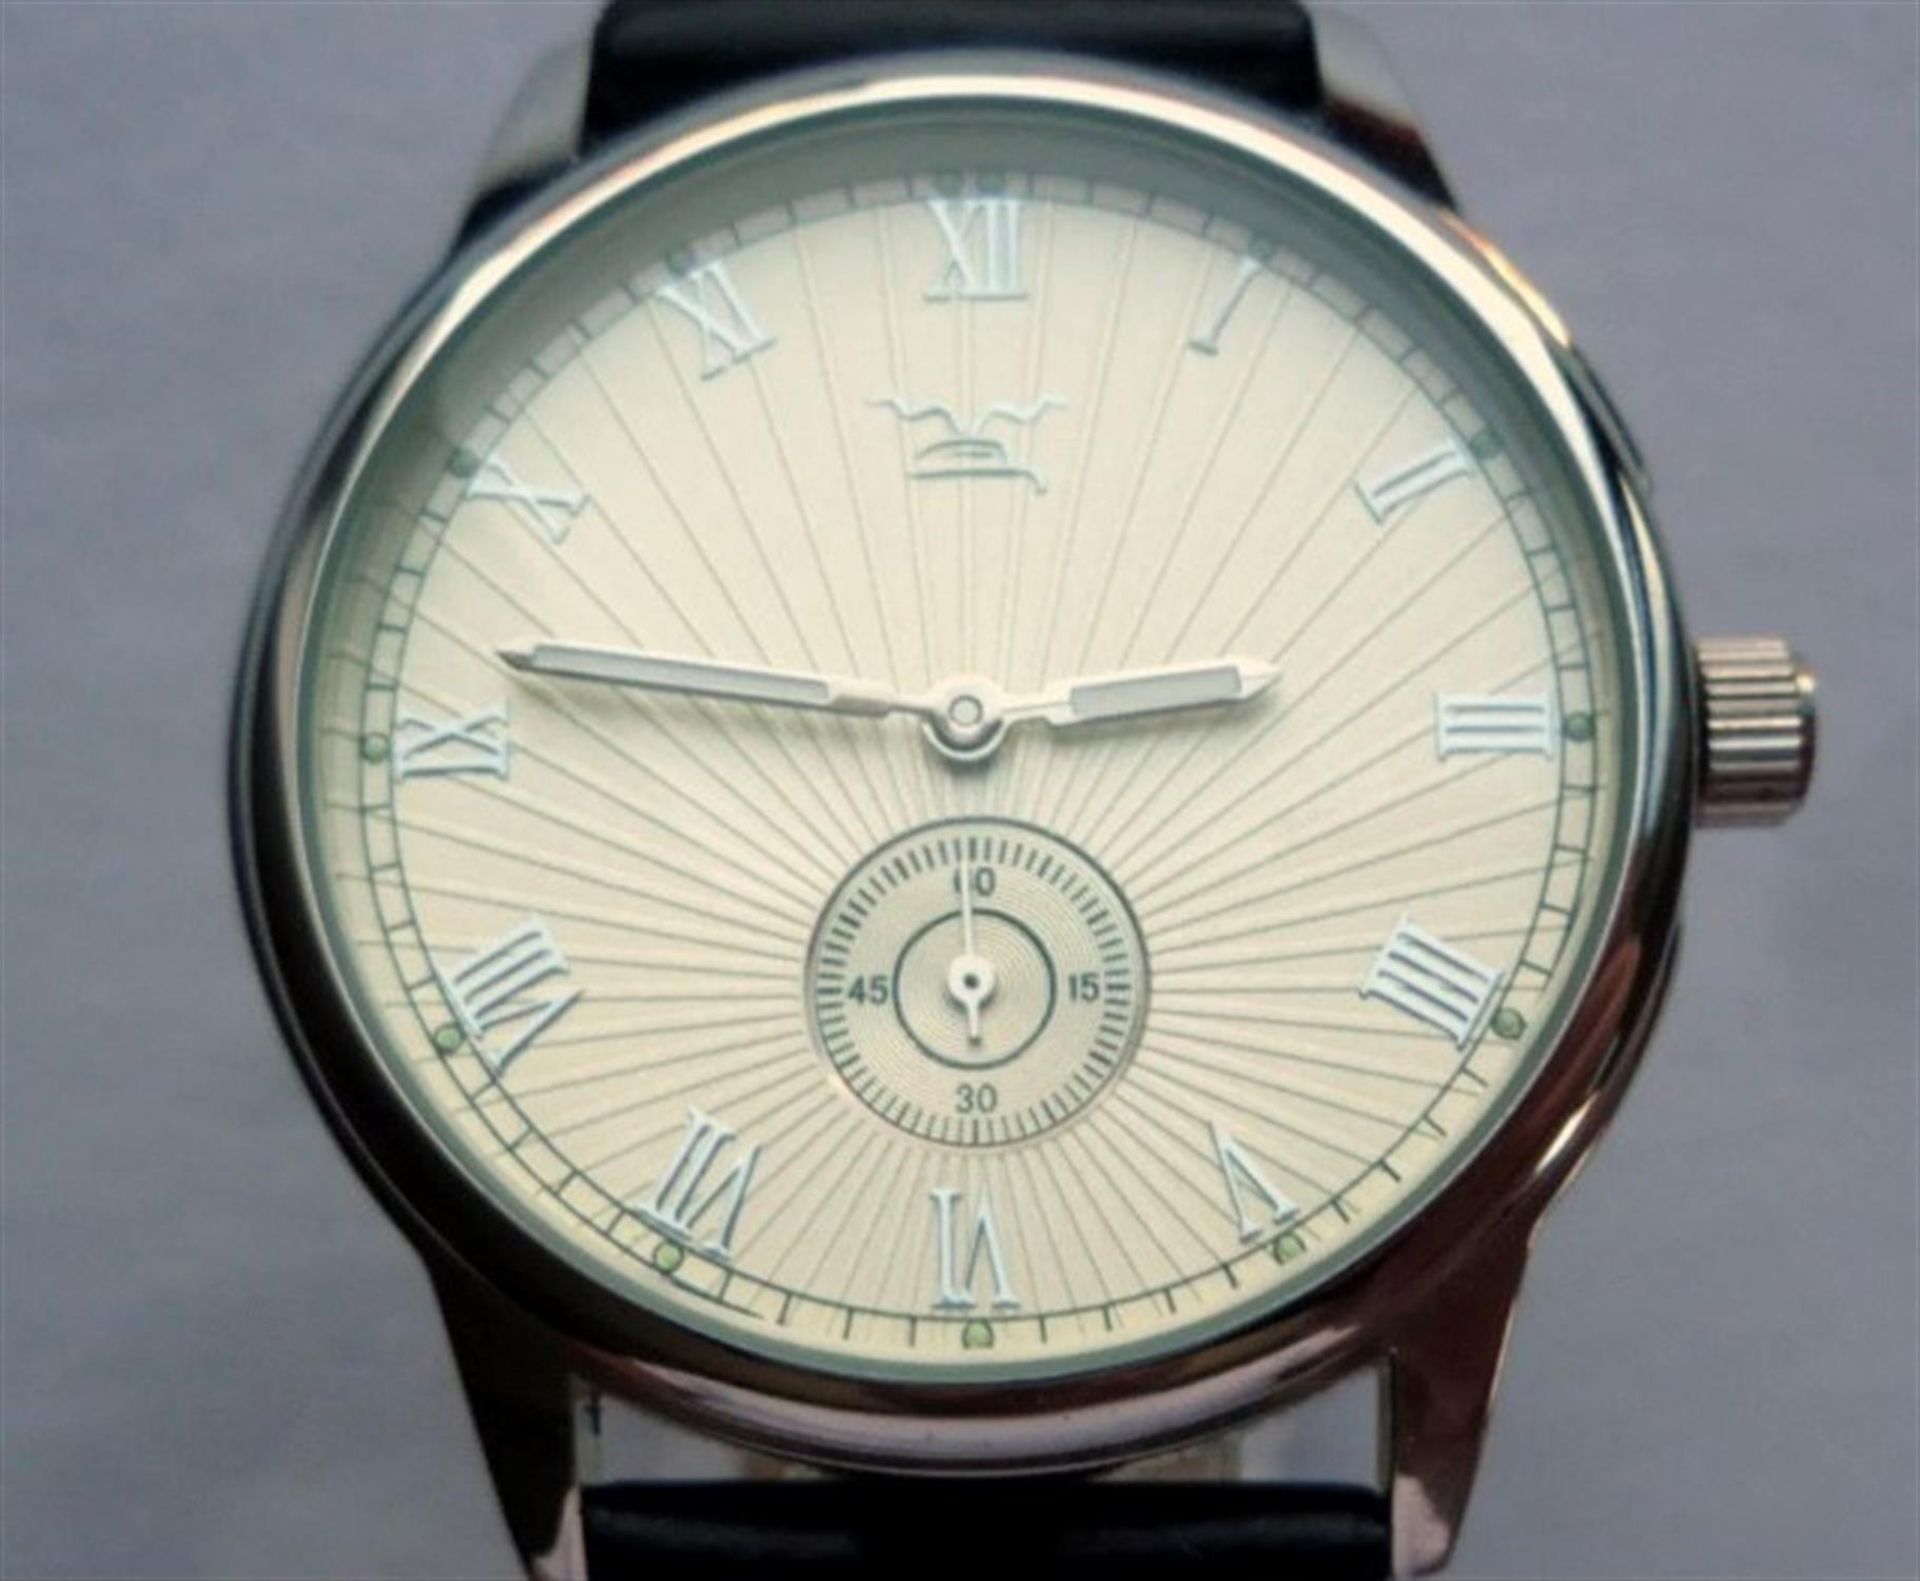 A Mercedes-Benz Classic Art Deco Style Gullwing Watch - Image 9 of 10